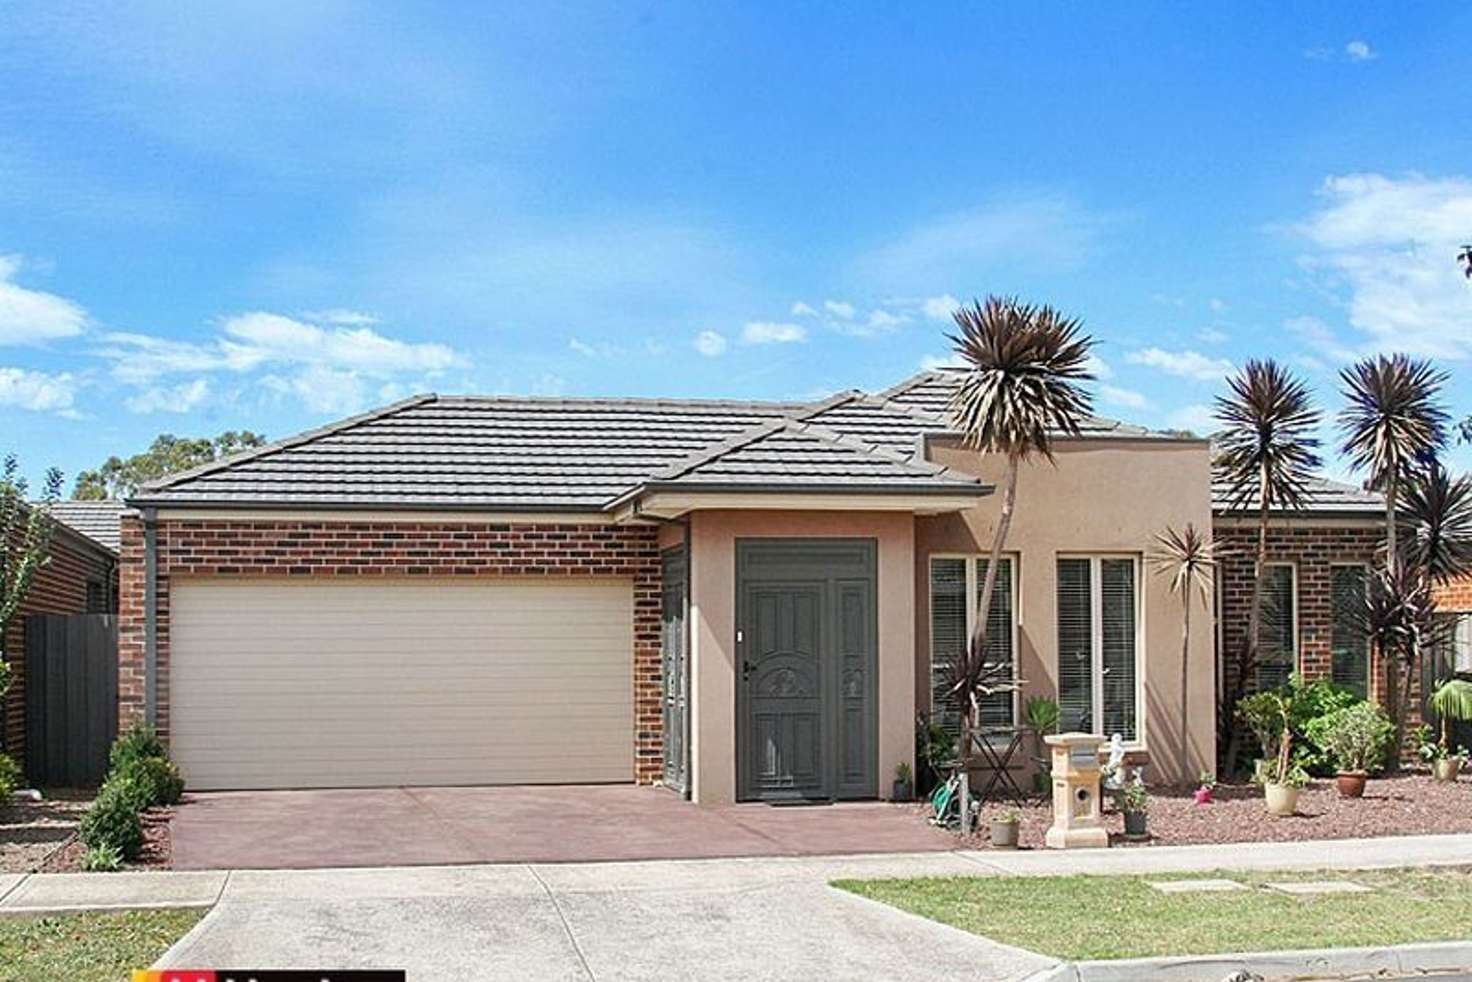 Main view of Homely house listing, 10 Villeroy St, Mernda VIC 3754